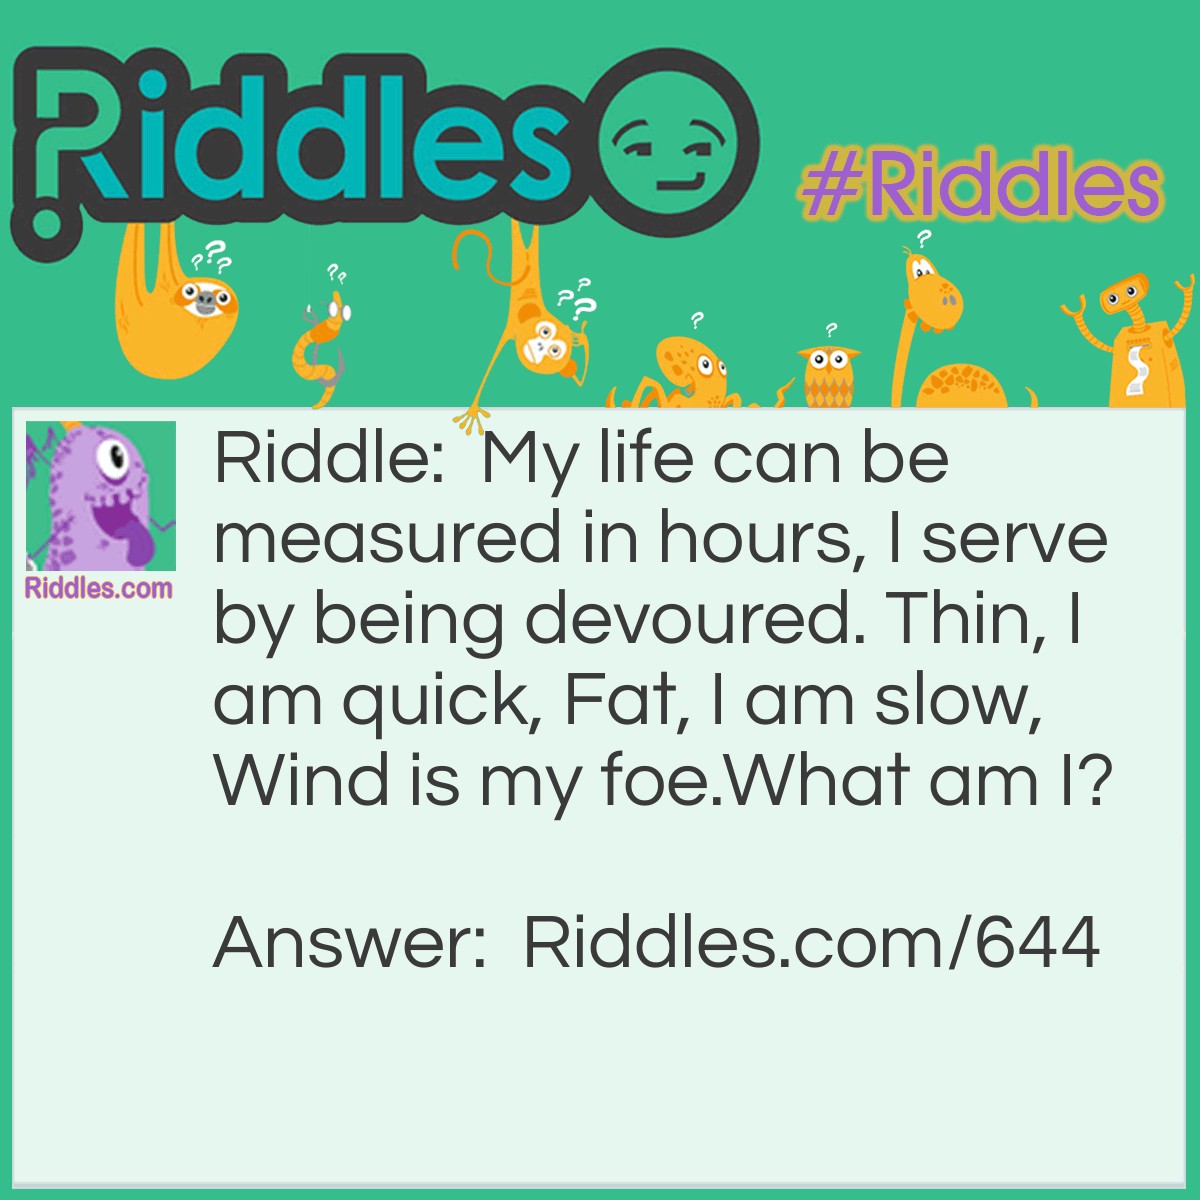 Riddle: My life can be measured in hours, I serve by being devoured. Thin, I am quick, Fat, I am slow, Wind is my foe.
What am I? Answer: I am the wax of a candle.